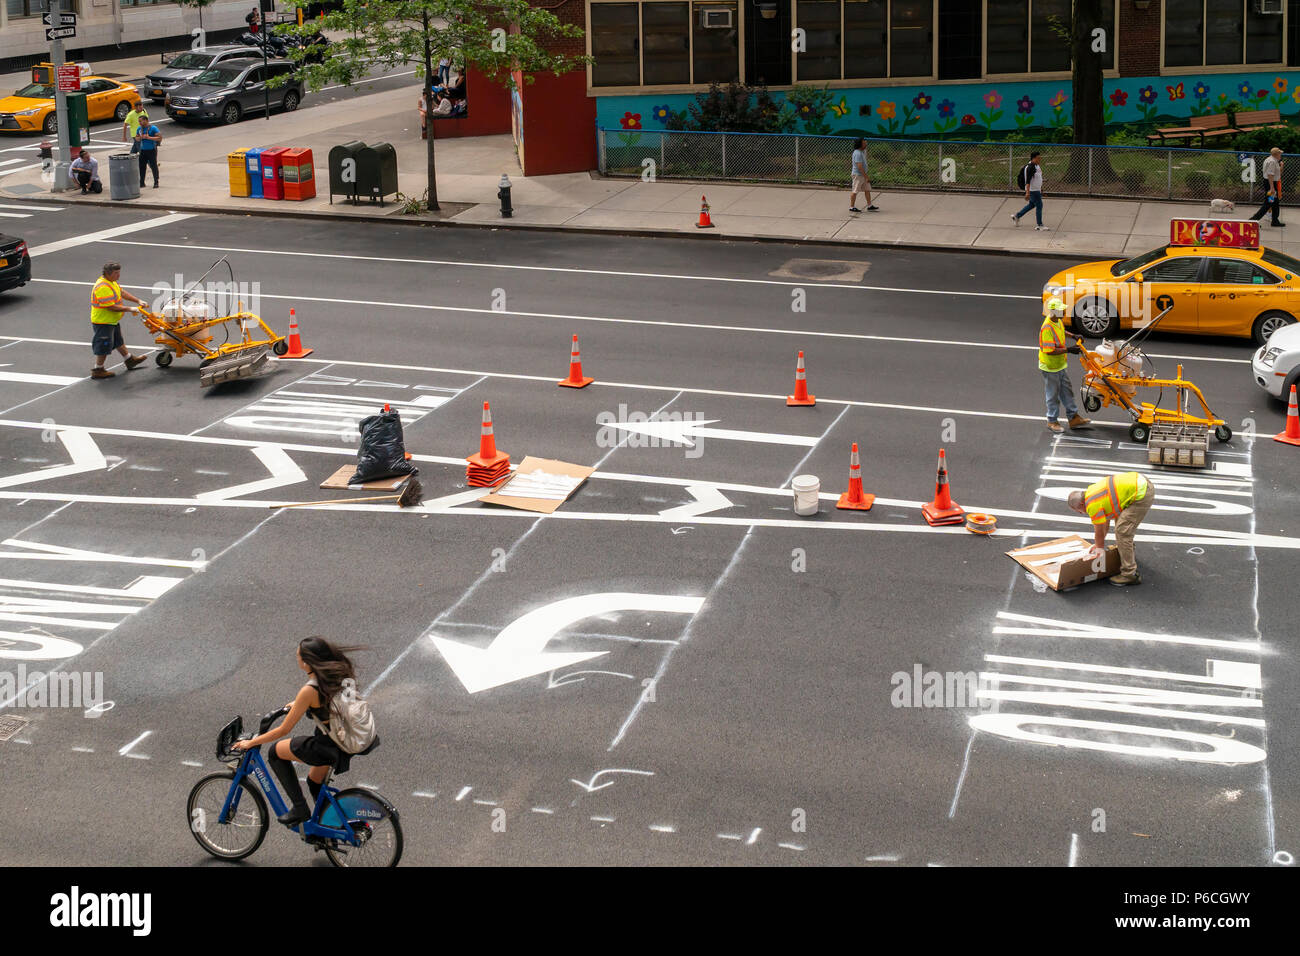 Employees from the New York City Department of Transportation install new thermoplastic lane markings after a recent re-paving on Ninth Avenue in the Chelsea neighborhood of New York on Wednesday, June 20, 2018.  (Â© Richard B. Levine) Stock Photo